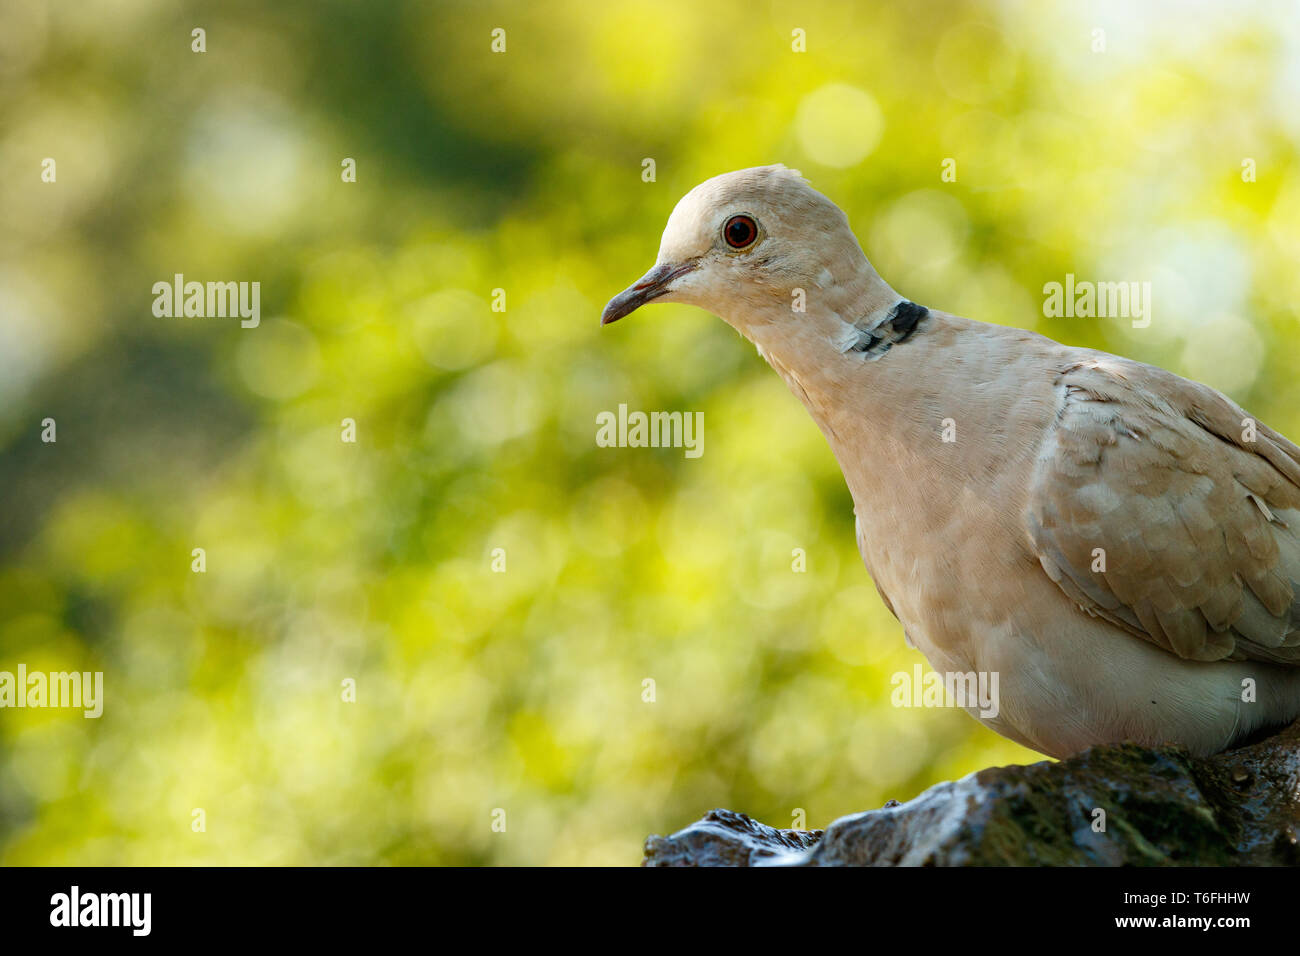 Bird sitting on a rock and looking at you Stock Photo